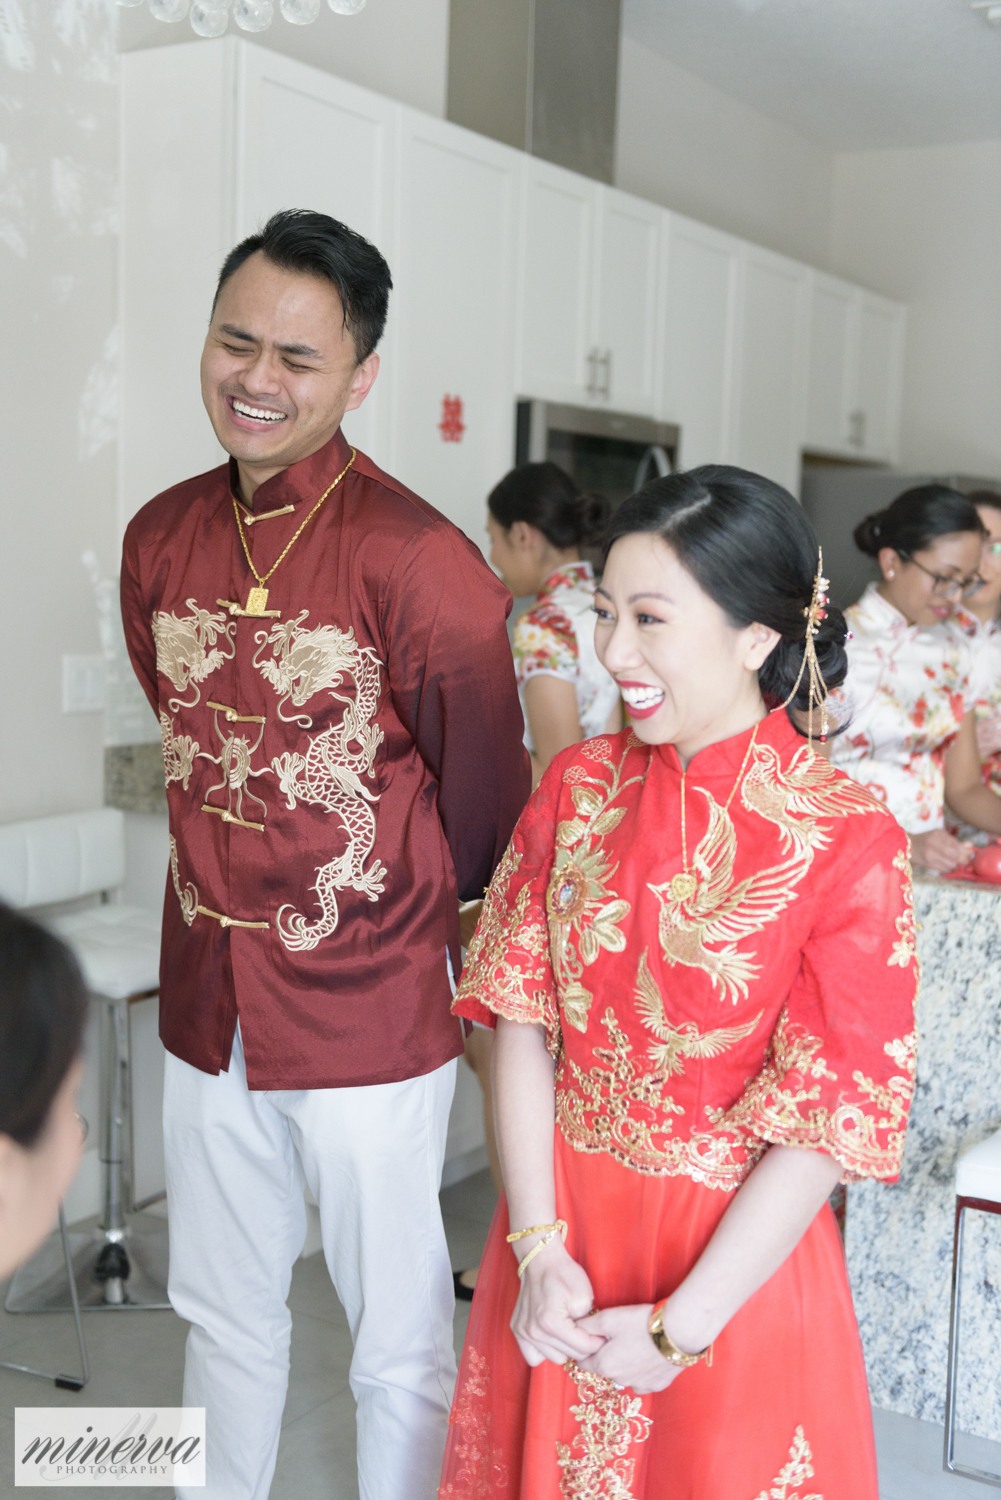 056_chinese-tea-ceremony_red-dress_four-seasons-resort-orlando_walt-disney-world_wedding_first-look_staircase_central-florida-photographer_luxury-photography